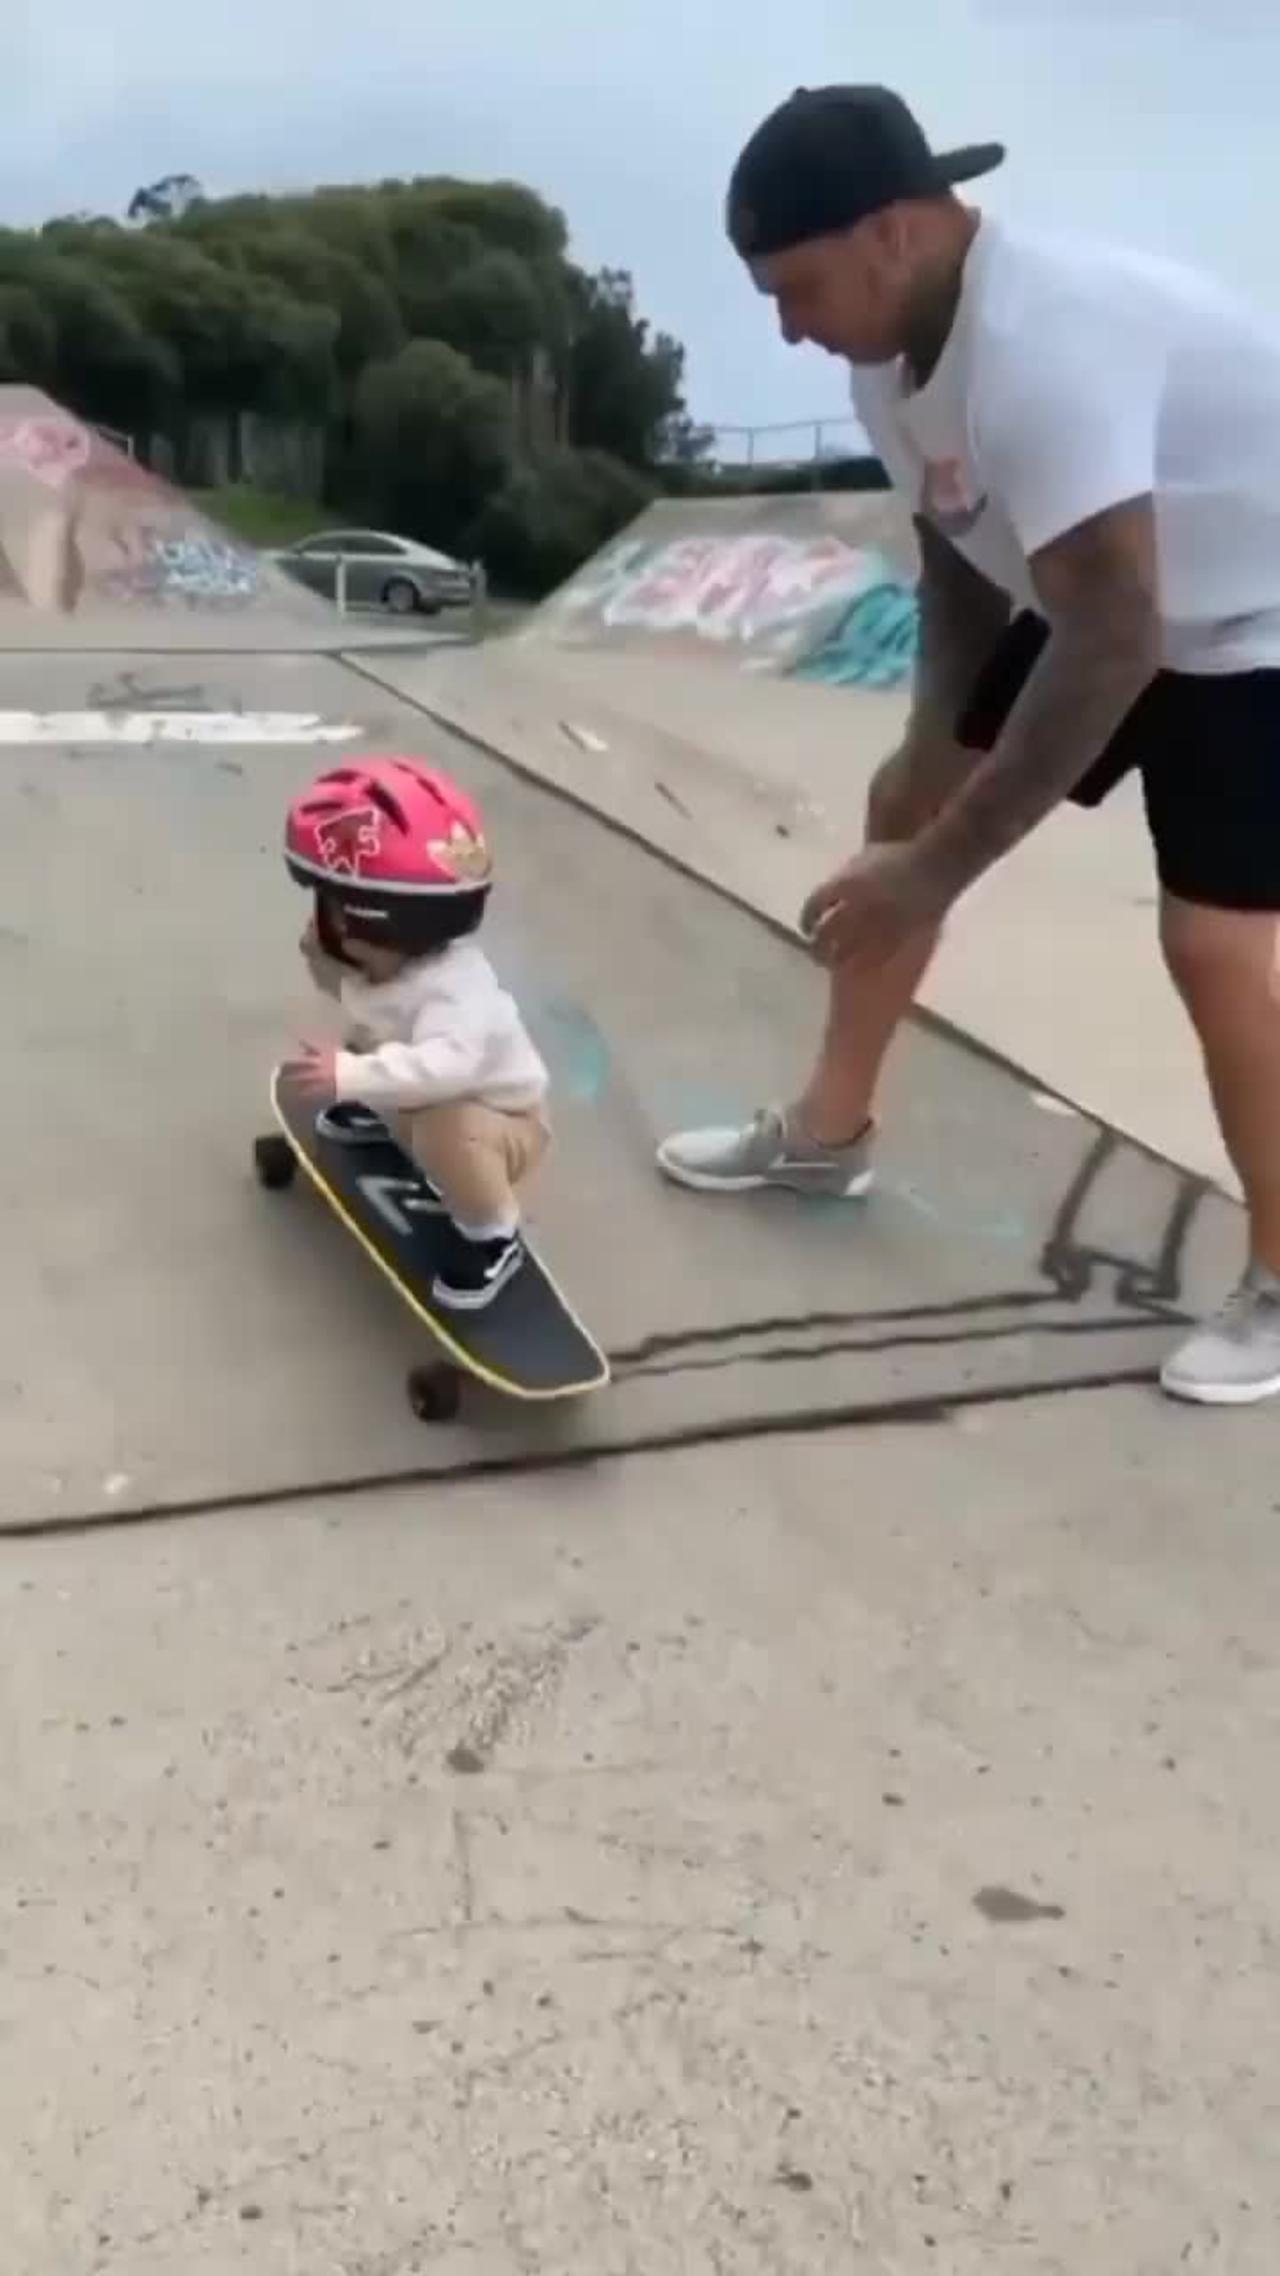 This little kid is so cute that it makes you happy when you see him